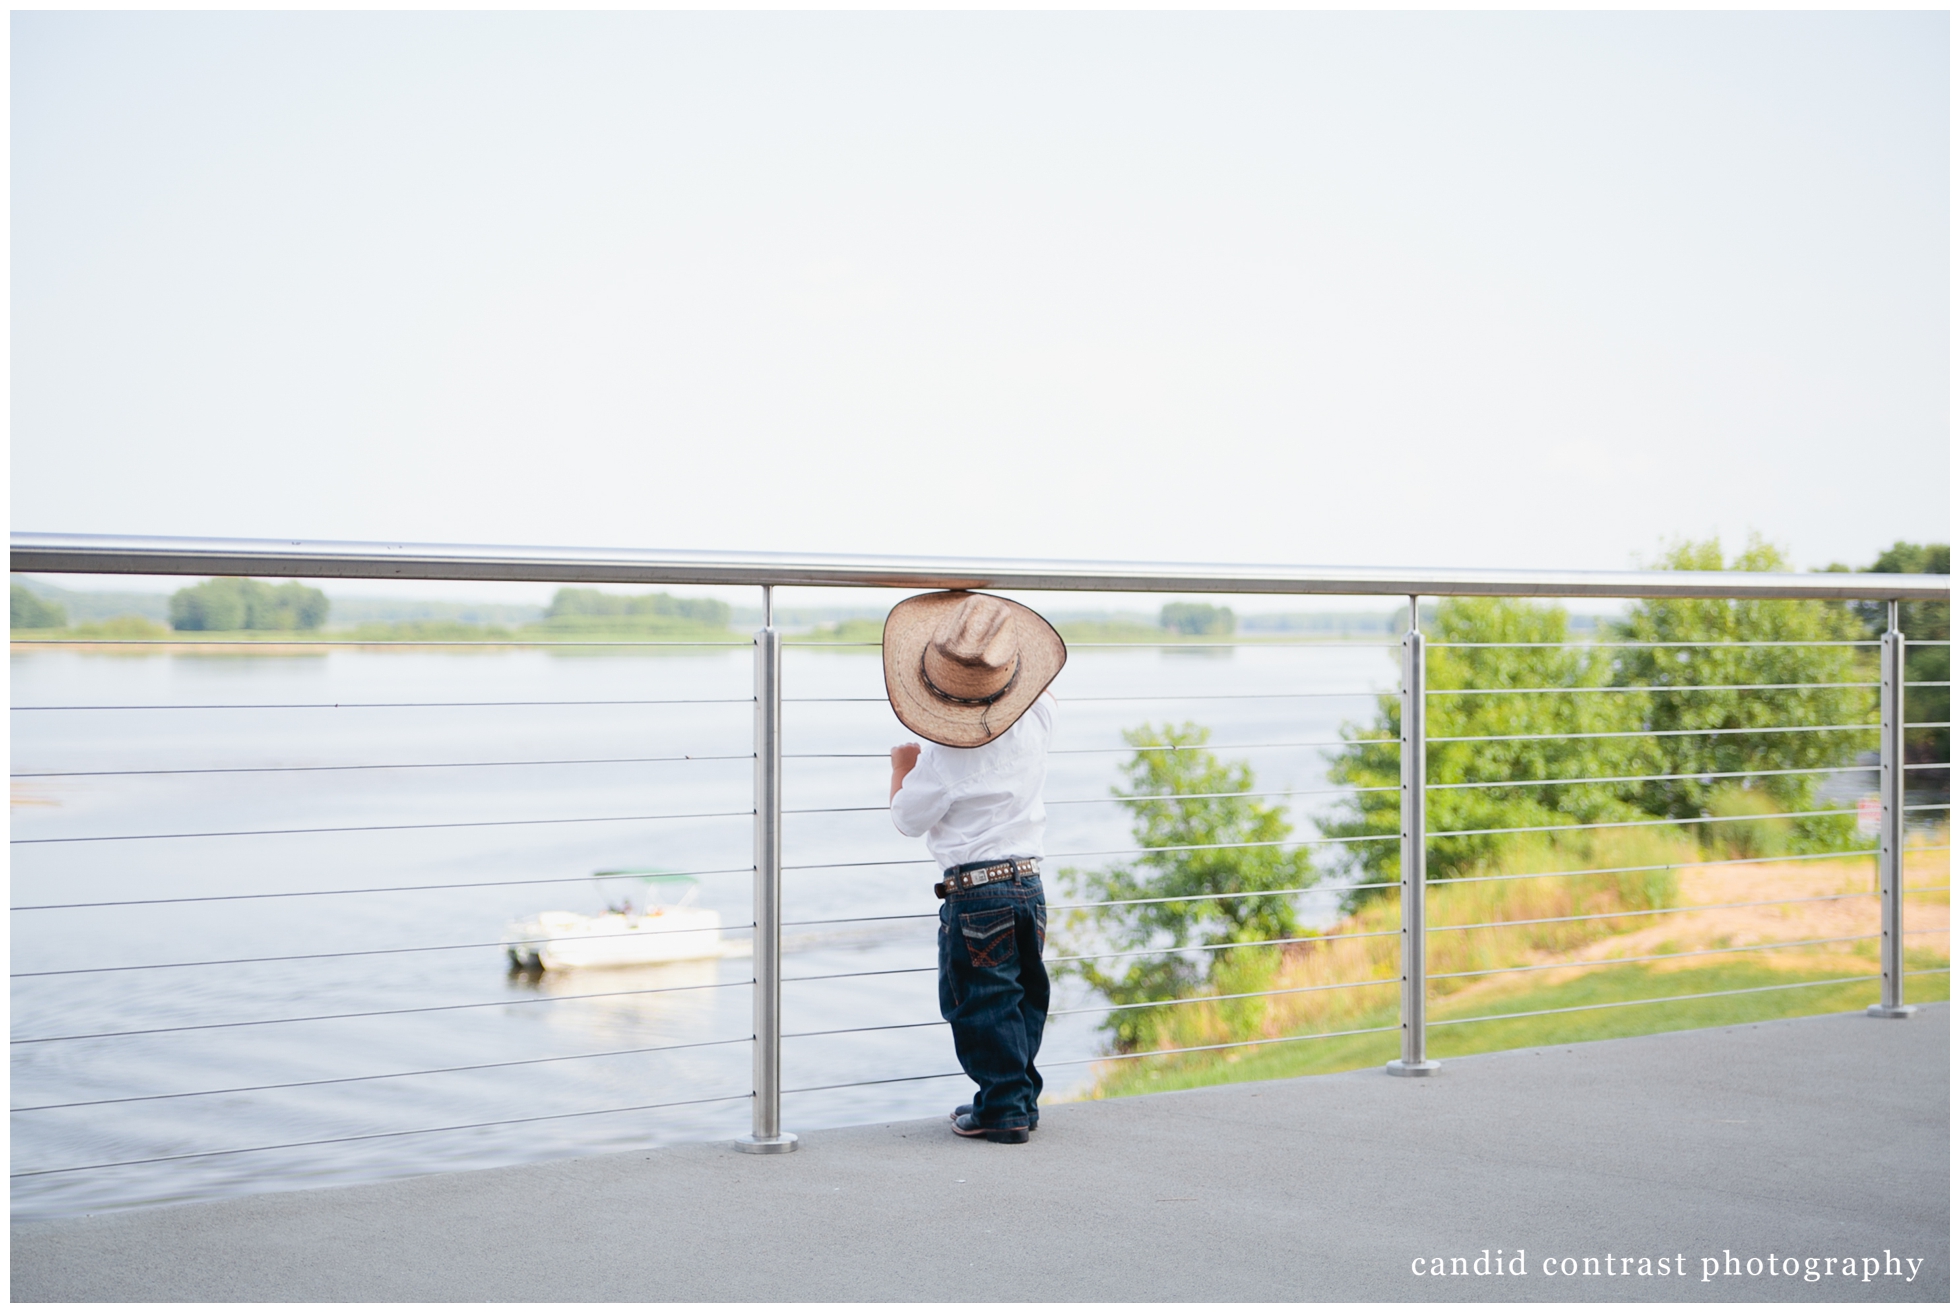 getting ready for Bellevue Iowa wedding at The Shore Event Centre, little cowboy looks out at Mississippi river, iowa wedding photographer candid contrast photography